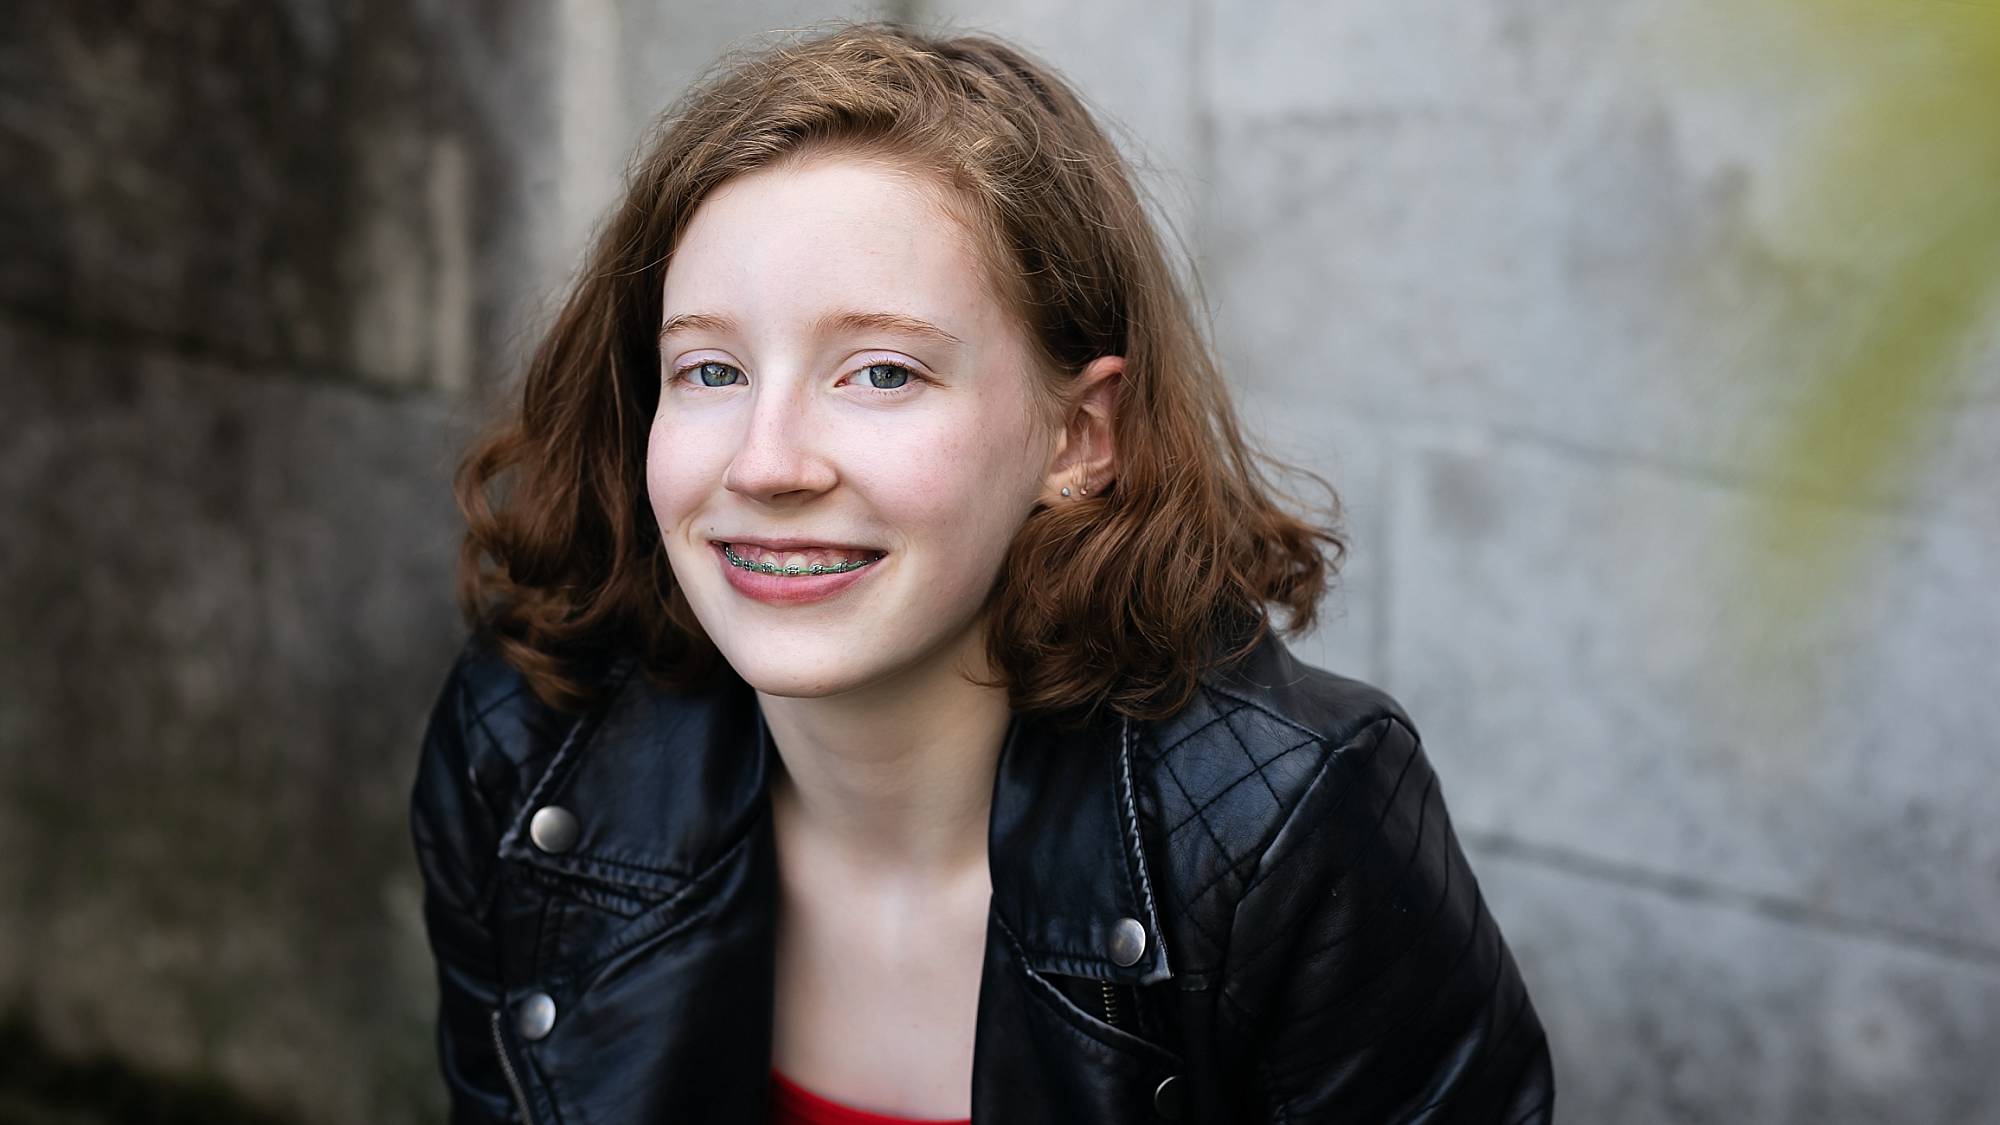 image of a teen with shoulder length wavy strawberry blonde hair. They are wearing a black leather jacket at Mellon Park in Pittsburgh.